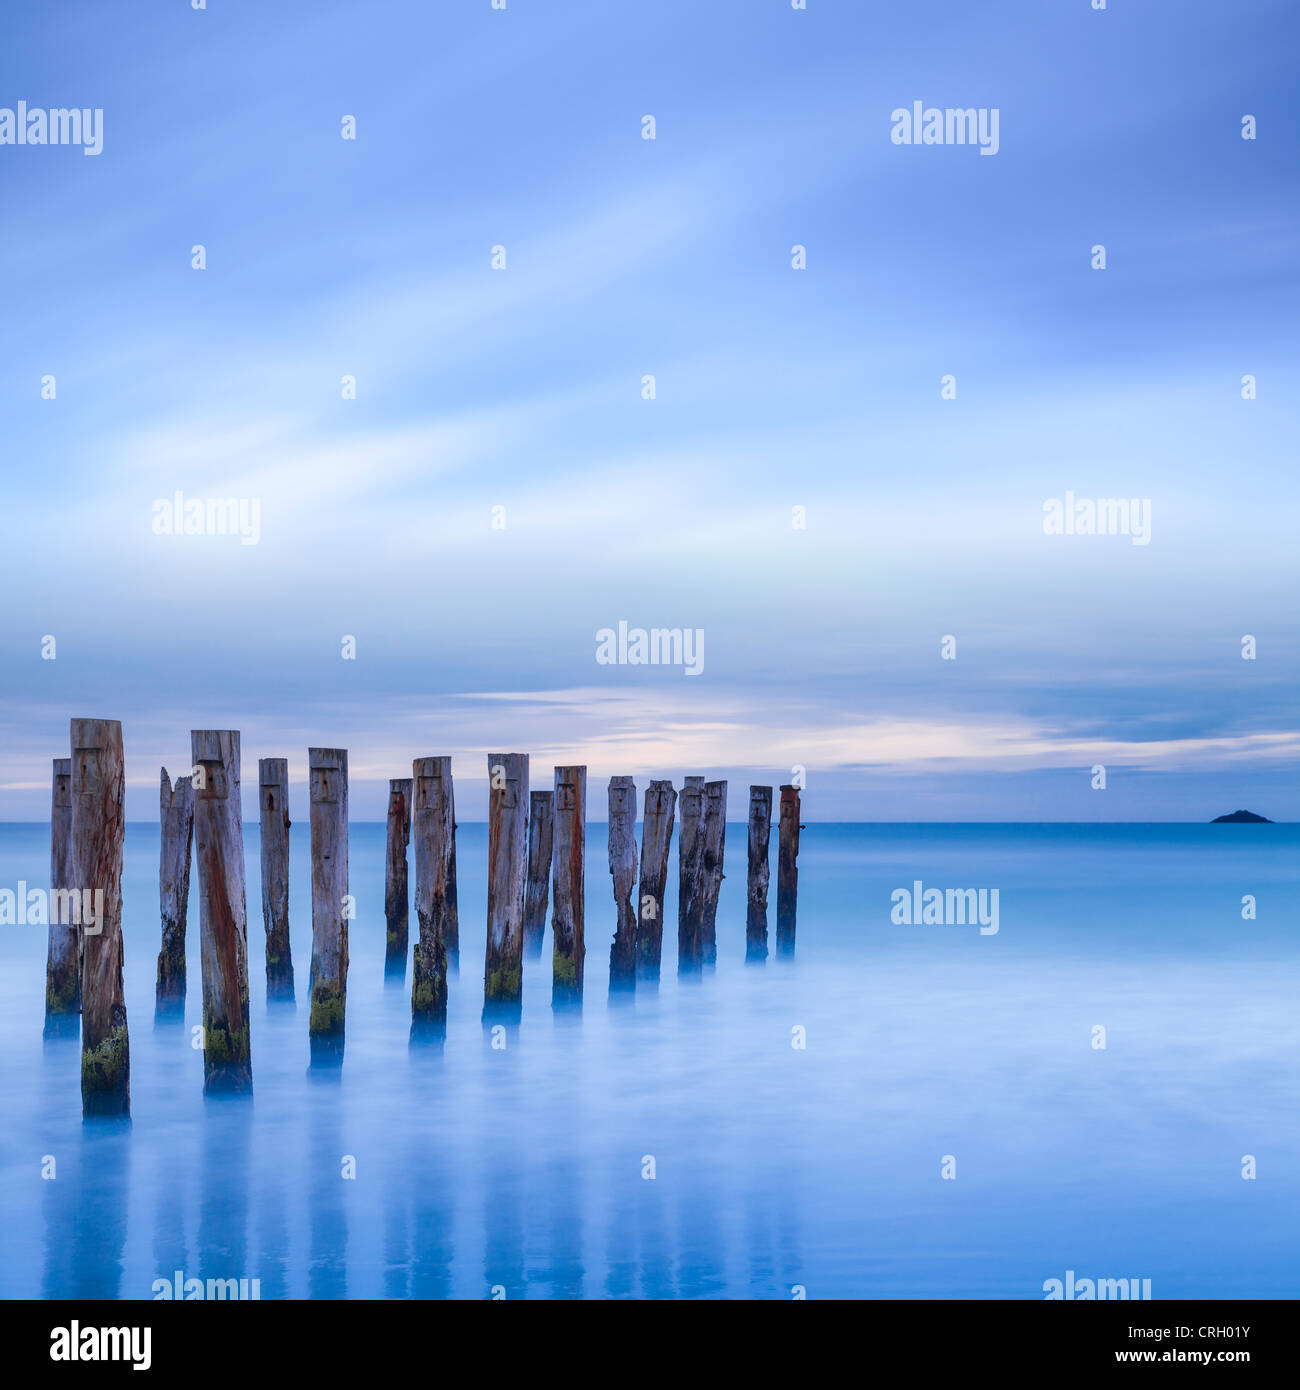 The remains of an old jetty on the beach near Dunedin, New Zealand, just before dawn, square. Stock Photo